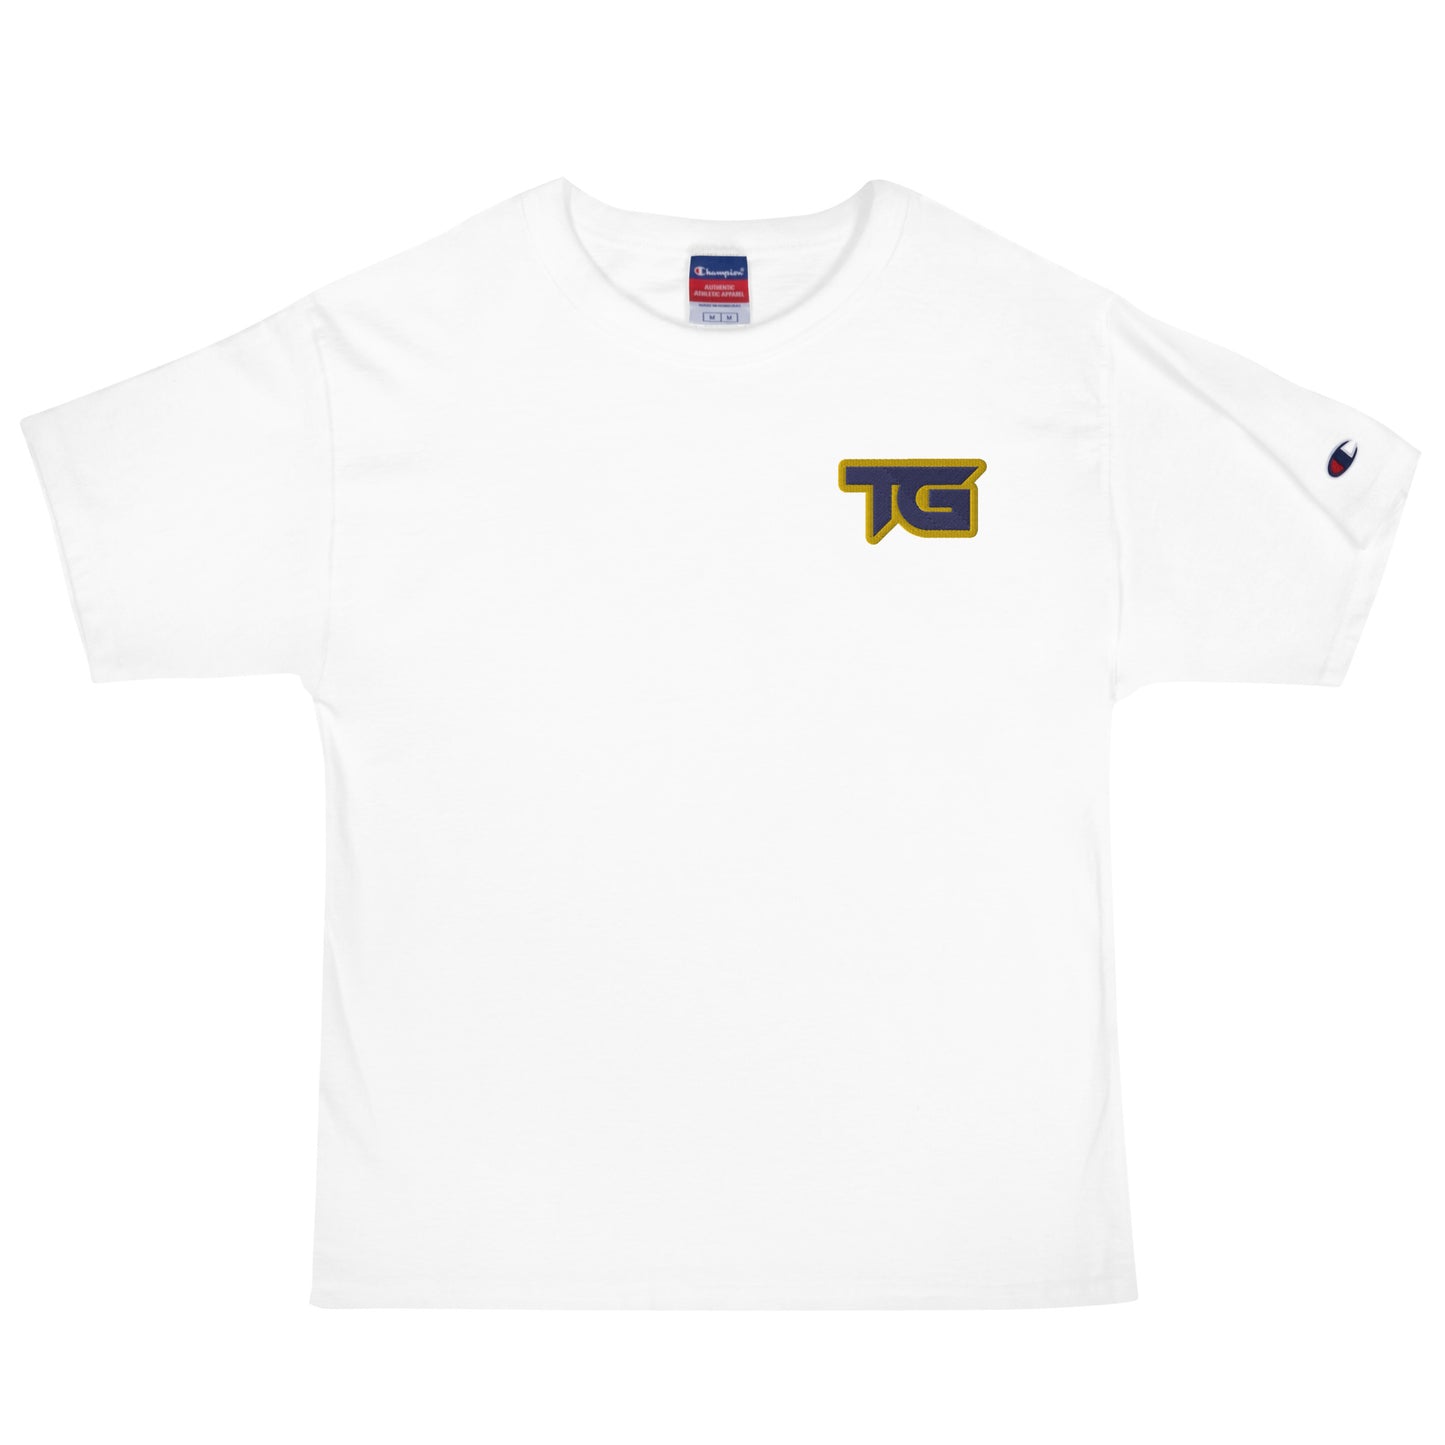 TG Embroidered Men's Champion T-Shirt